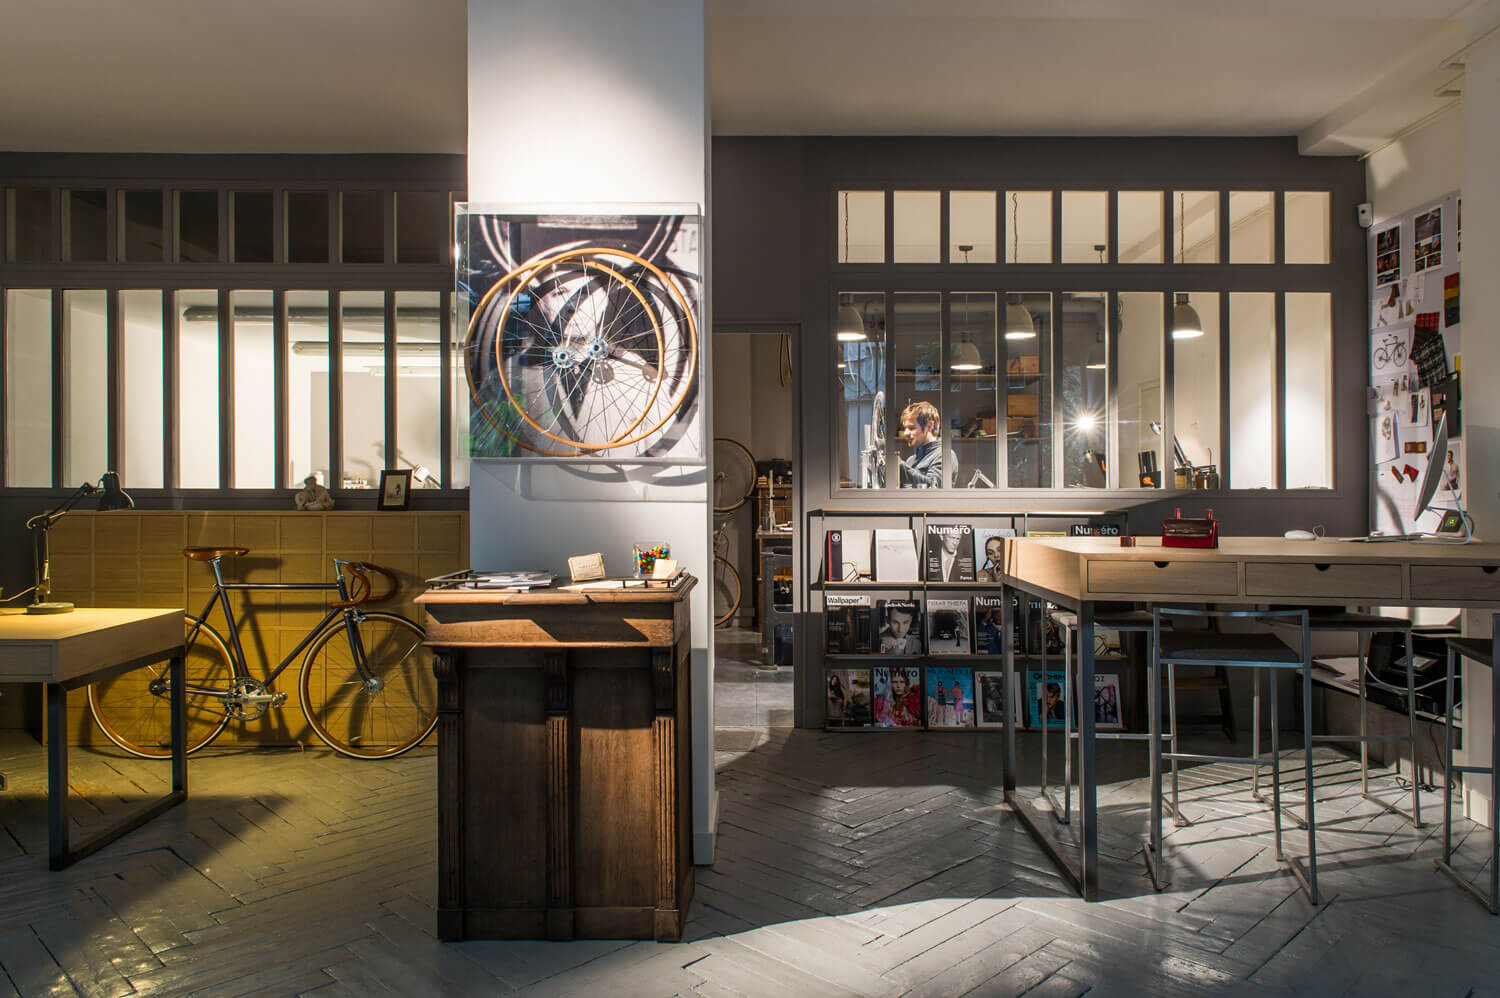 PORTRAIT: Maison Tamboite – About Family and Bicycles